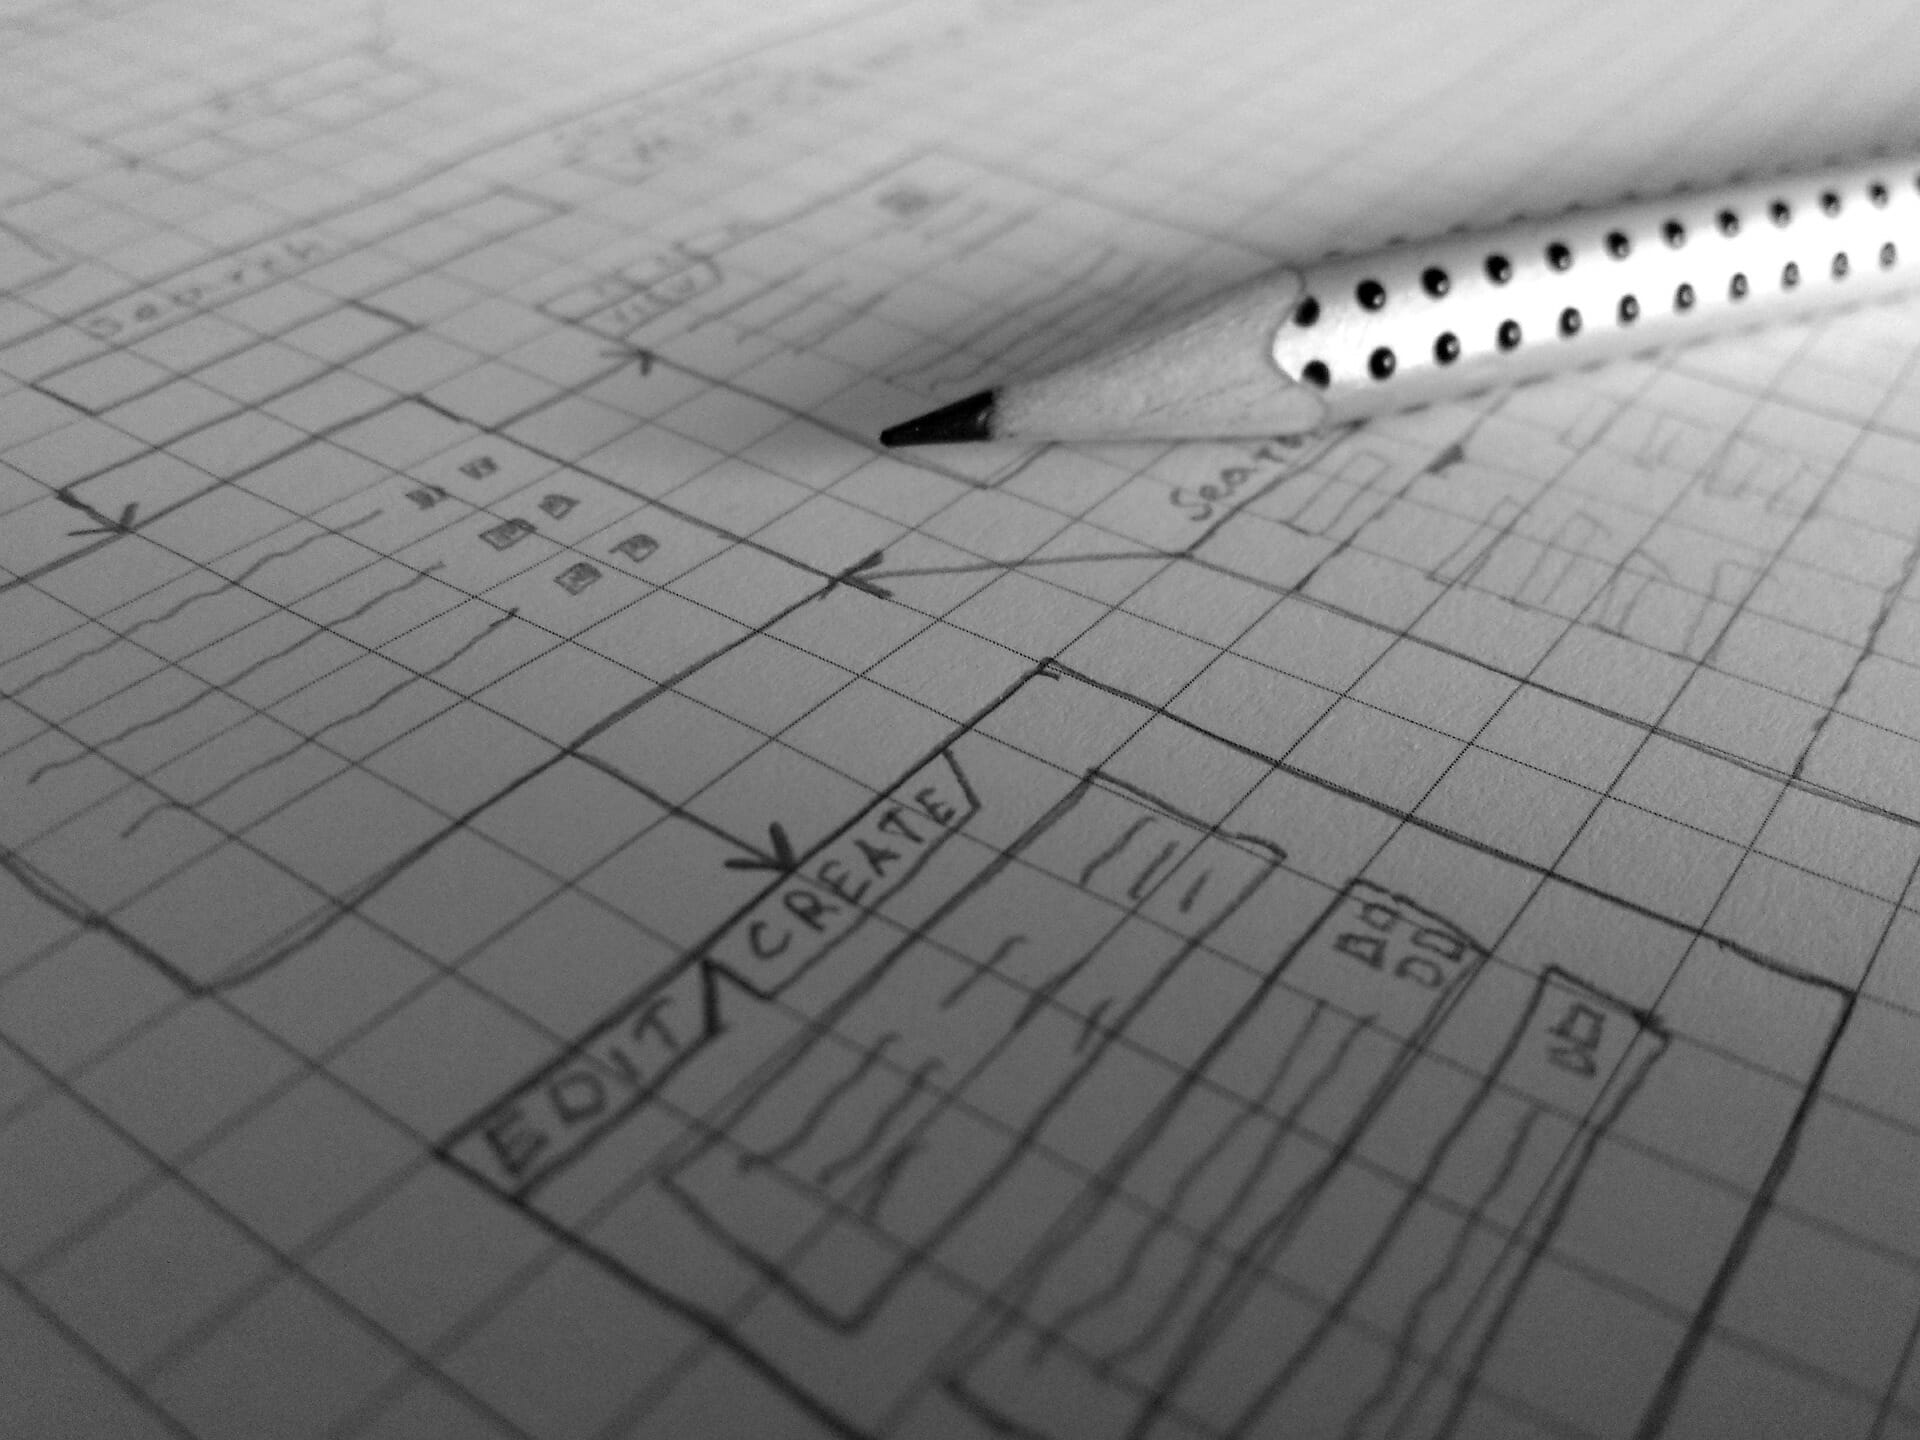 Pencil and graph paper with illustration of software plans